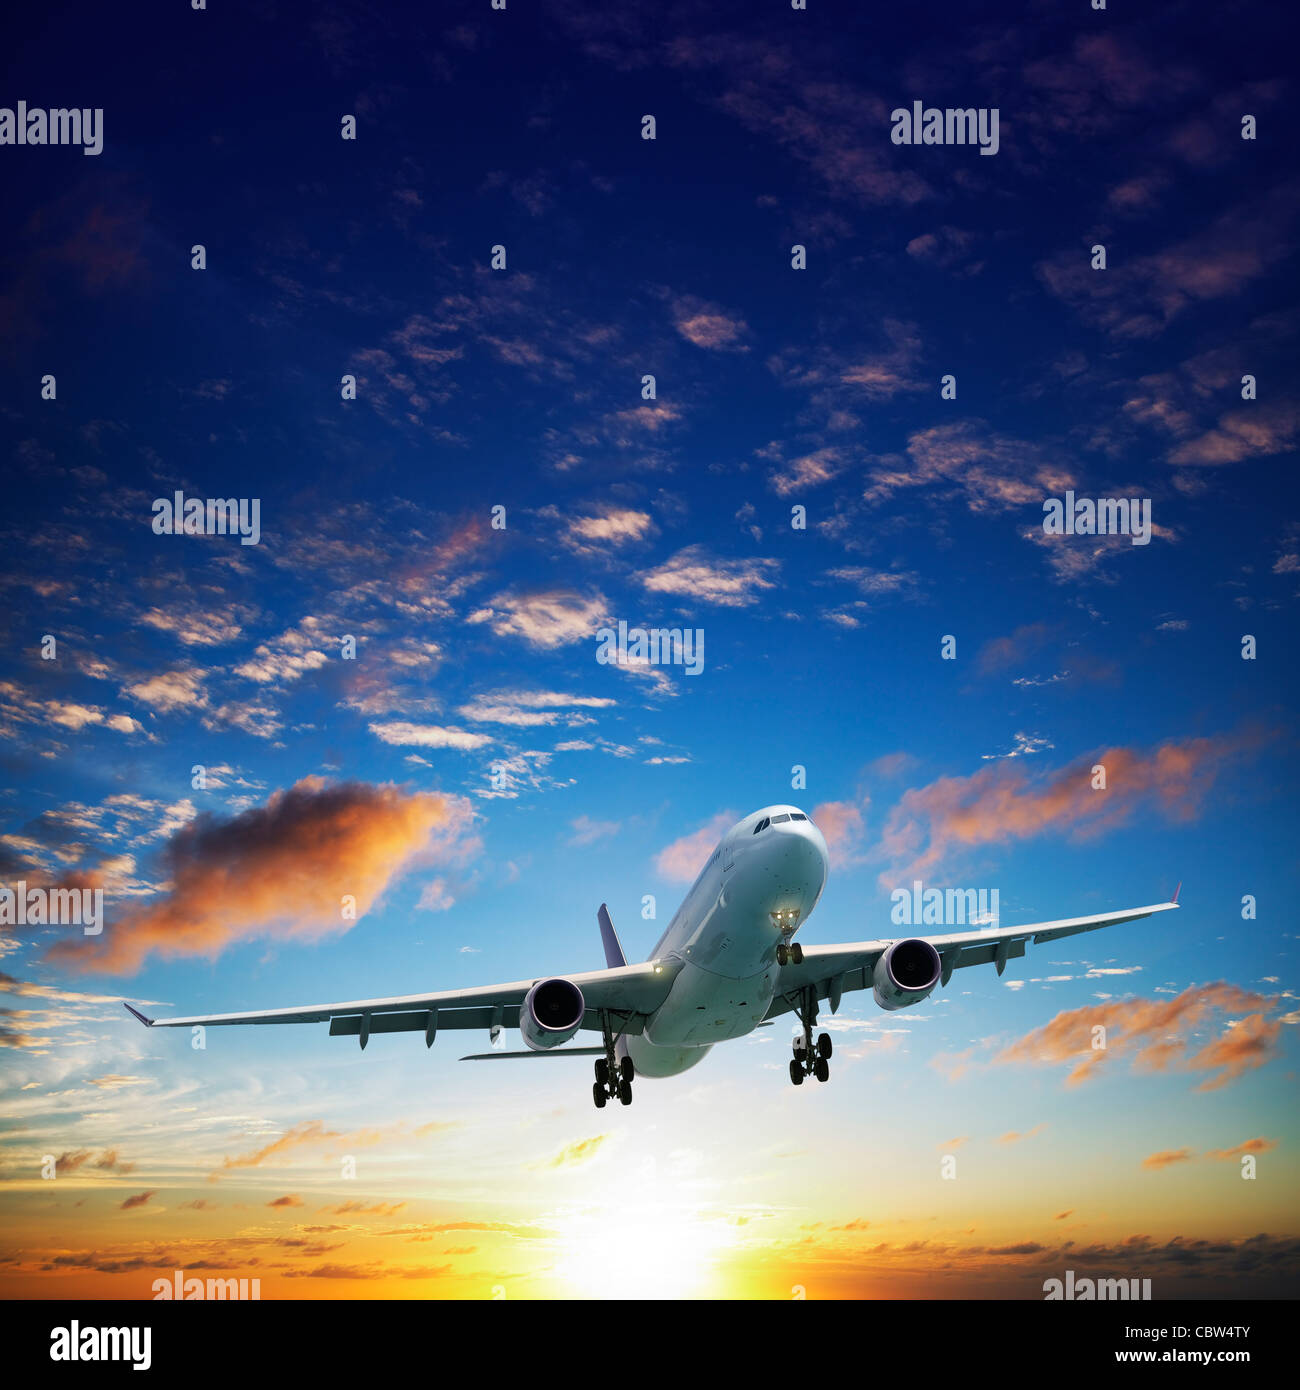 Jet airplane in a sky at sunset time. Square composition. Stock Photo